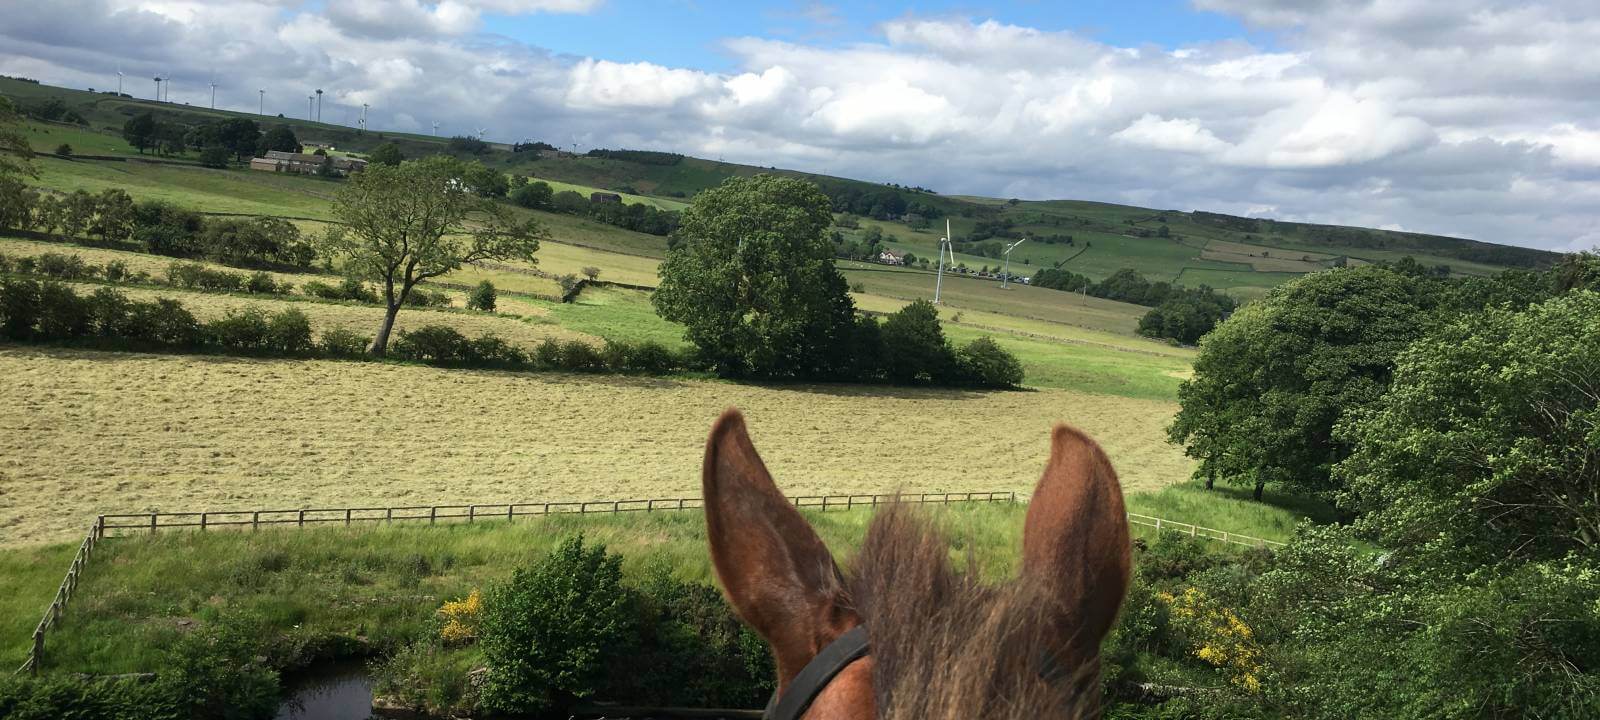 Scenic countryside view taken from horseback with horses ears and mane in foreground